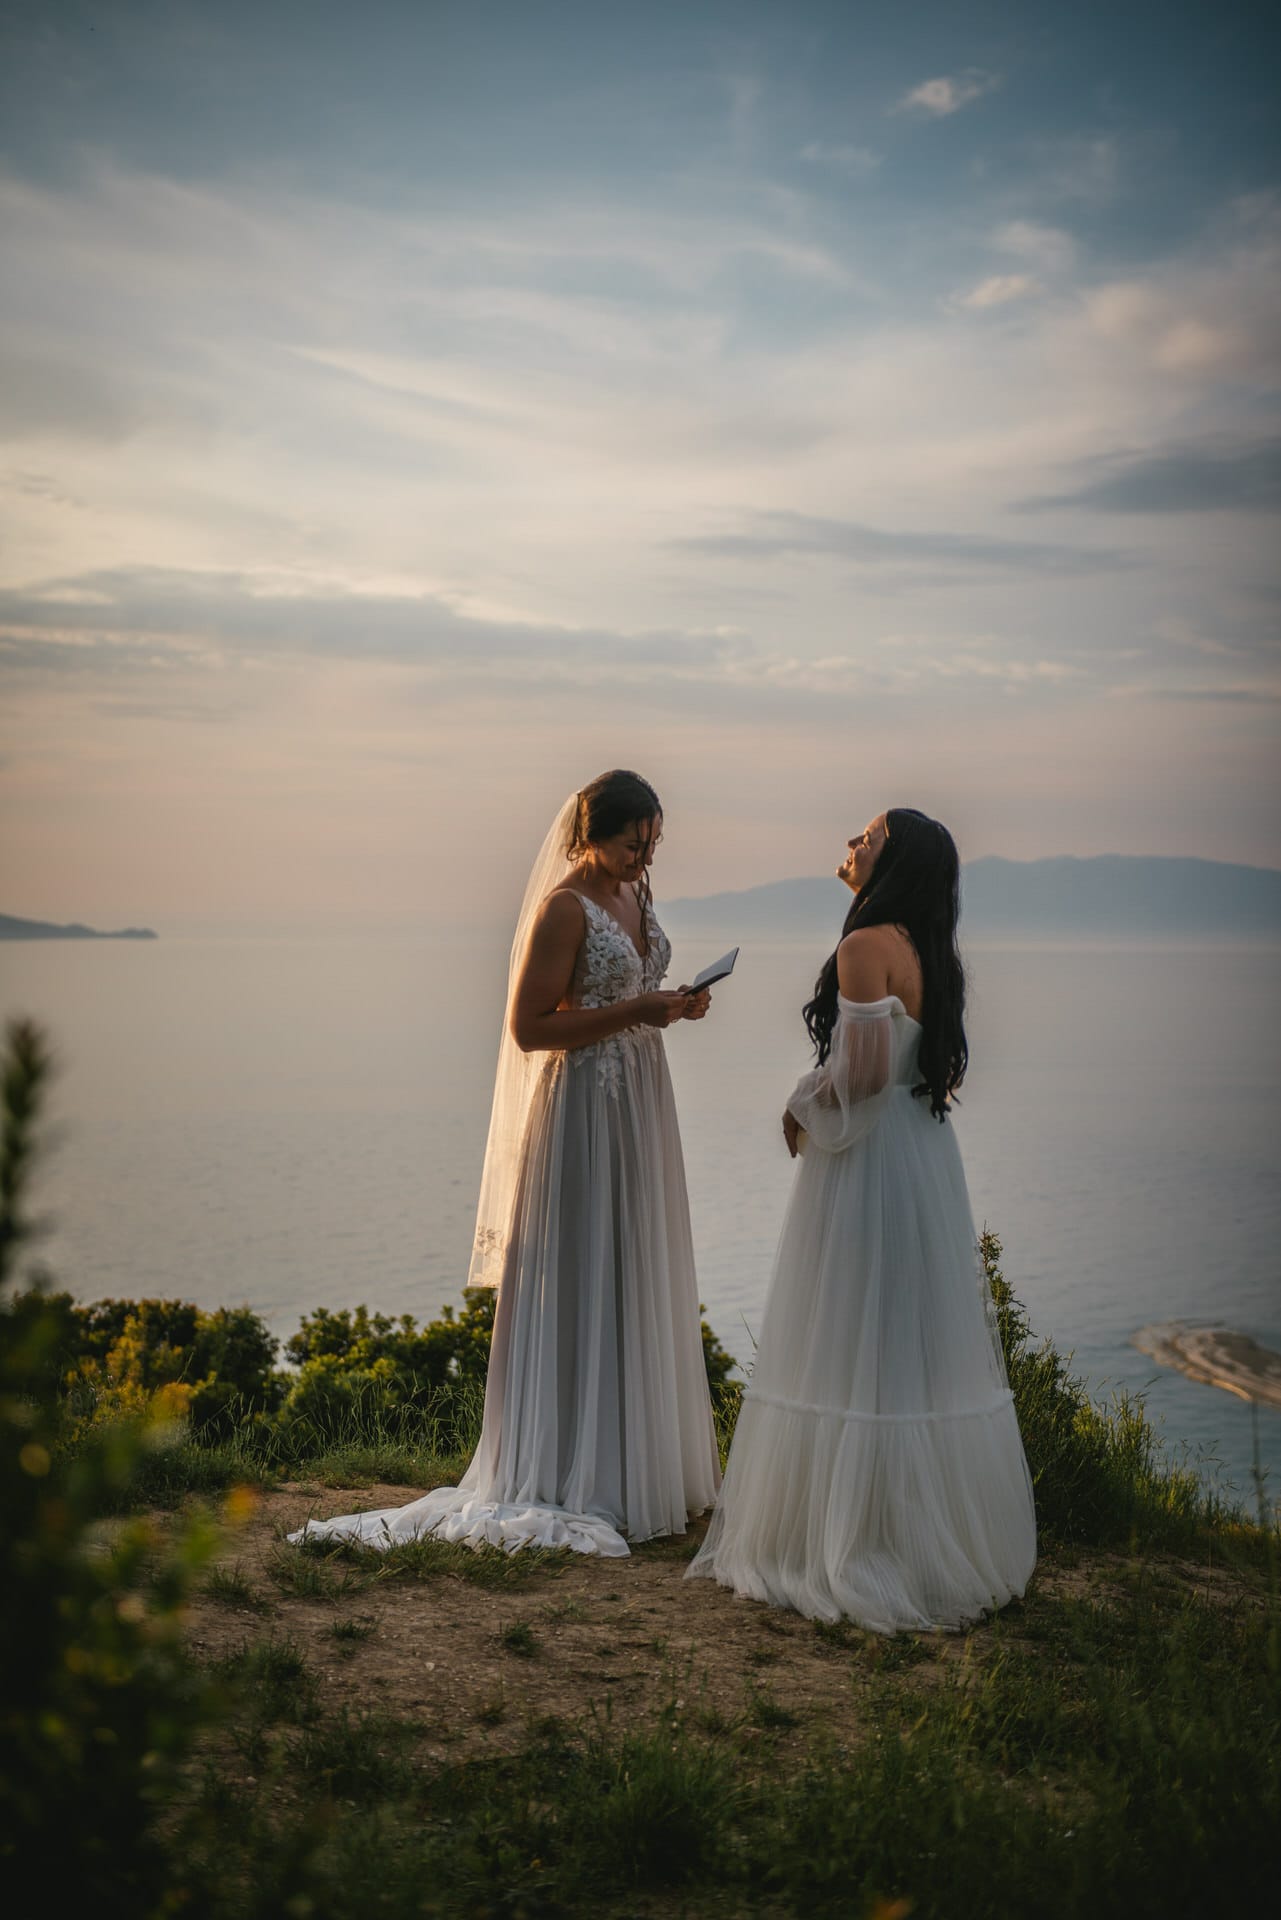 A magical scene of vows being shared at the Corfu elopement ceremony.